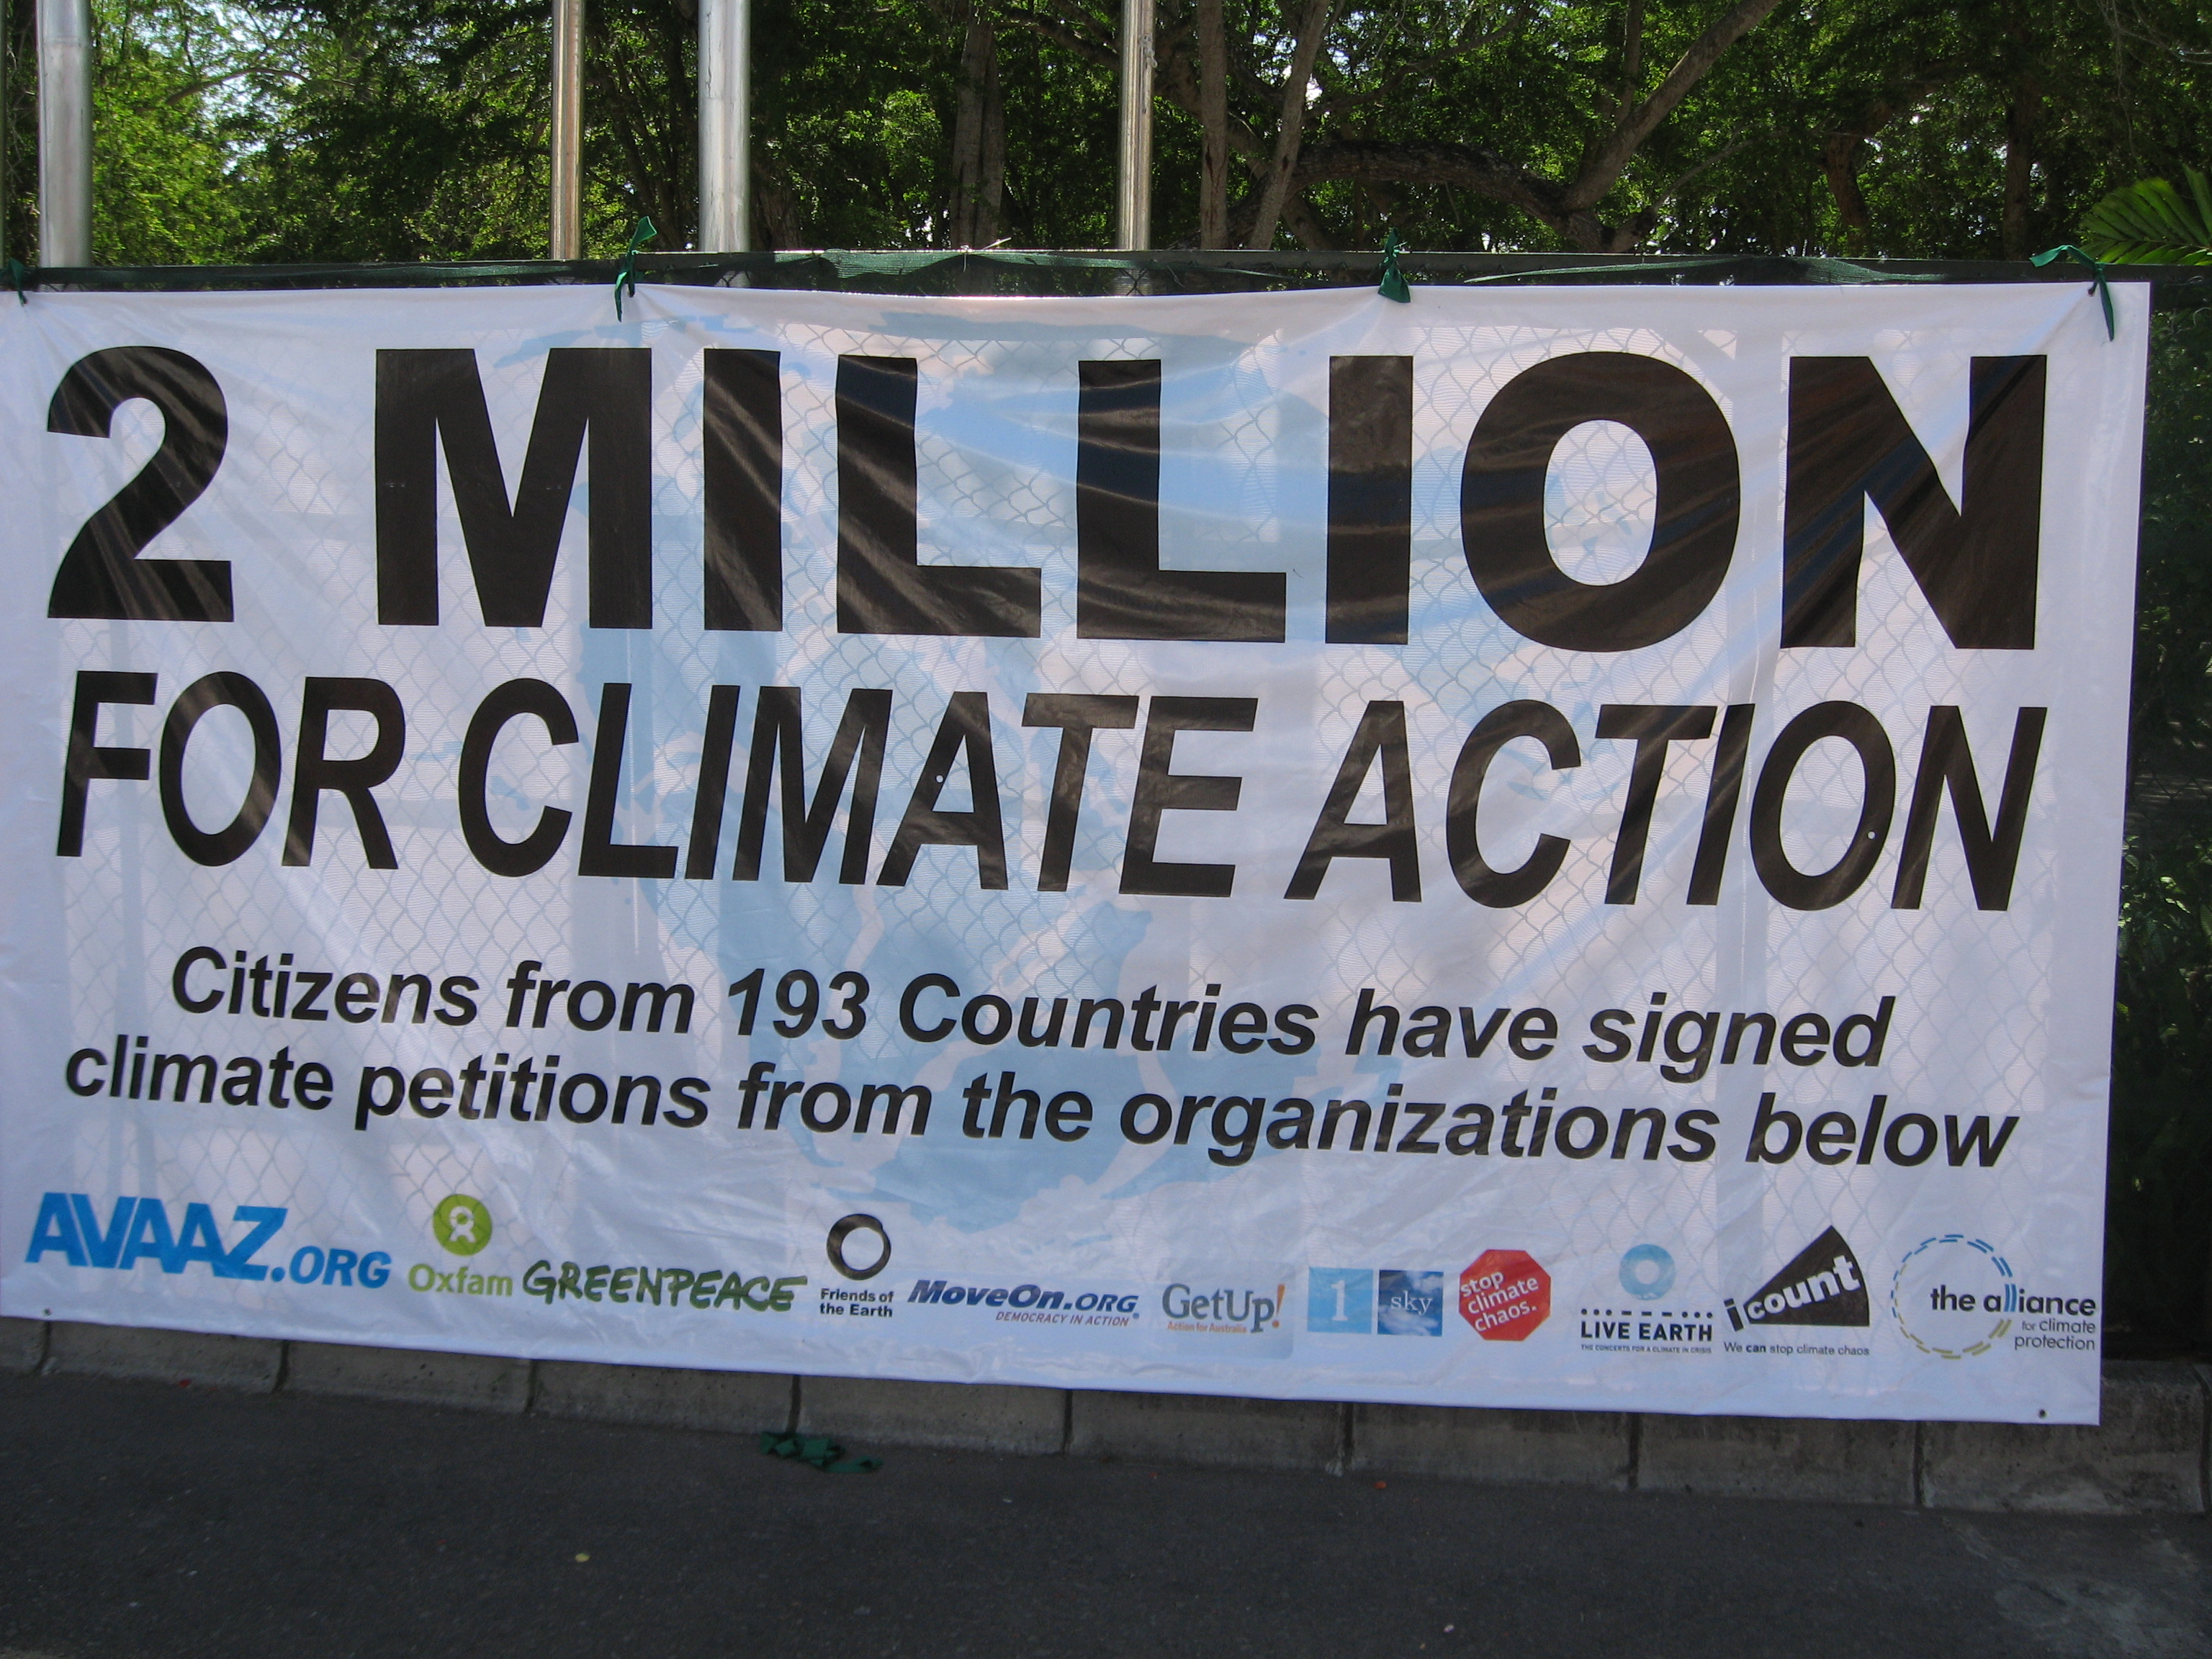 2 Million for Climate Action